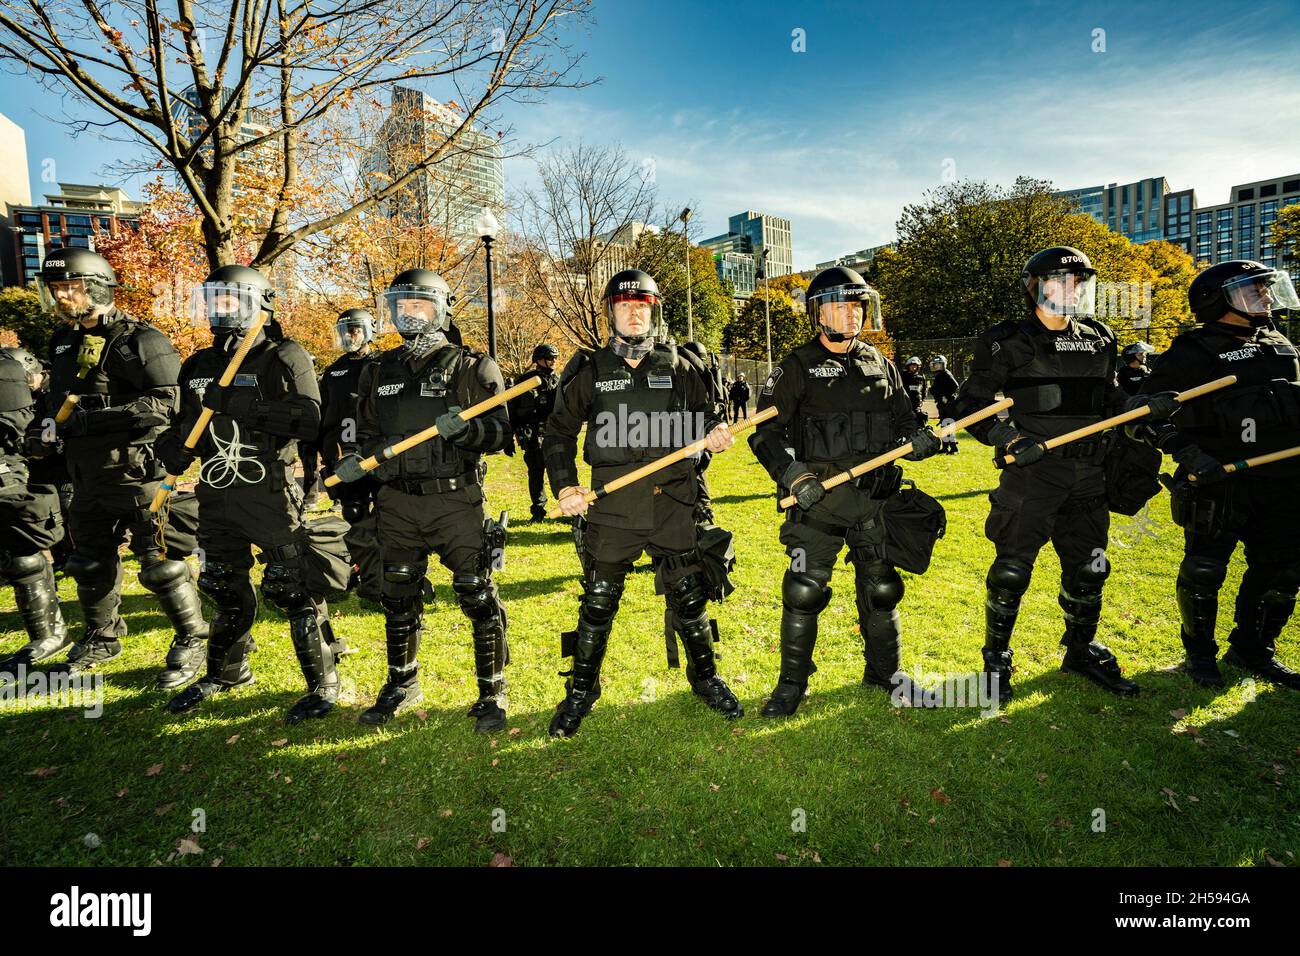 November 7, 2021, Boston Common, Boston, Massachusetts, MA, USA: Boston Police stands on guard during Rise Against Tyranny rally organized by Super Happy Fun America,' which describes itself as a 'right of center civil rights organization' on Boston Common. Credit: Keiko Hiromi/AFLO/Alamy Live News Stock Photo